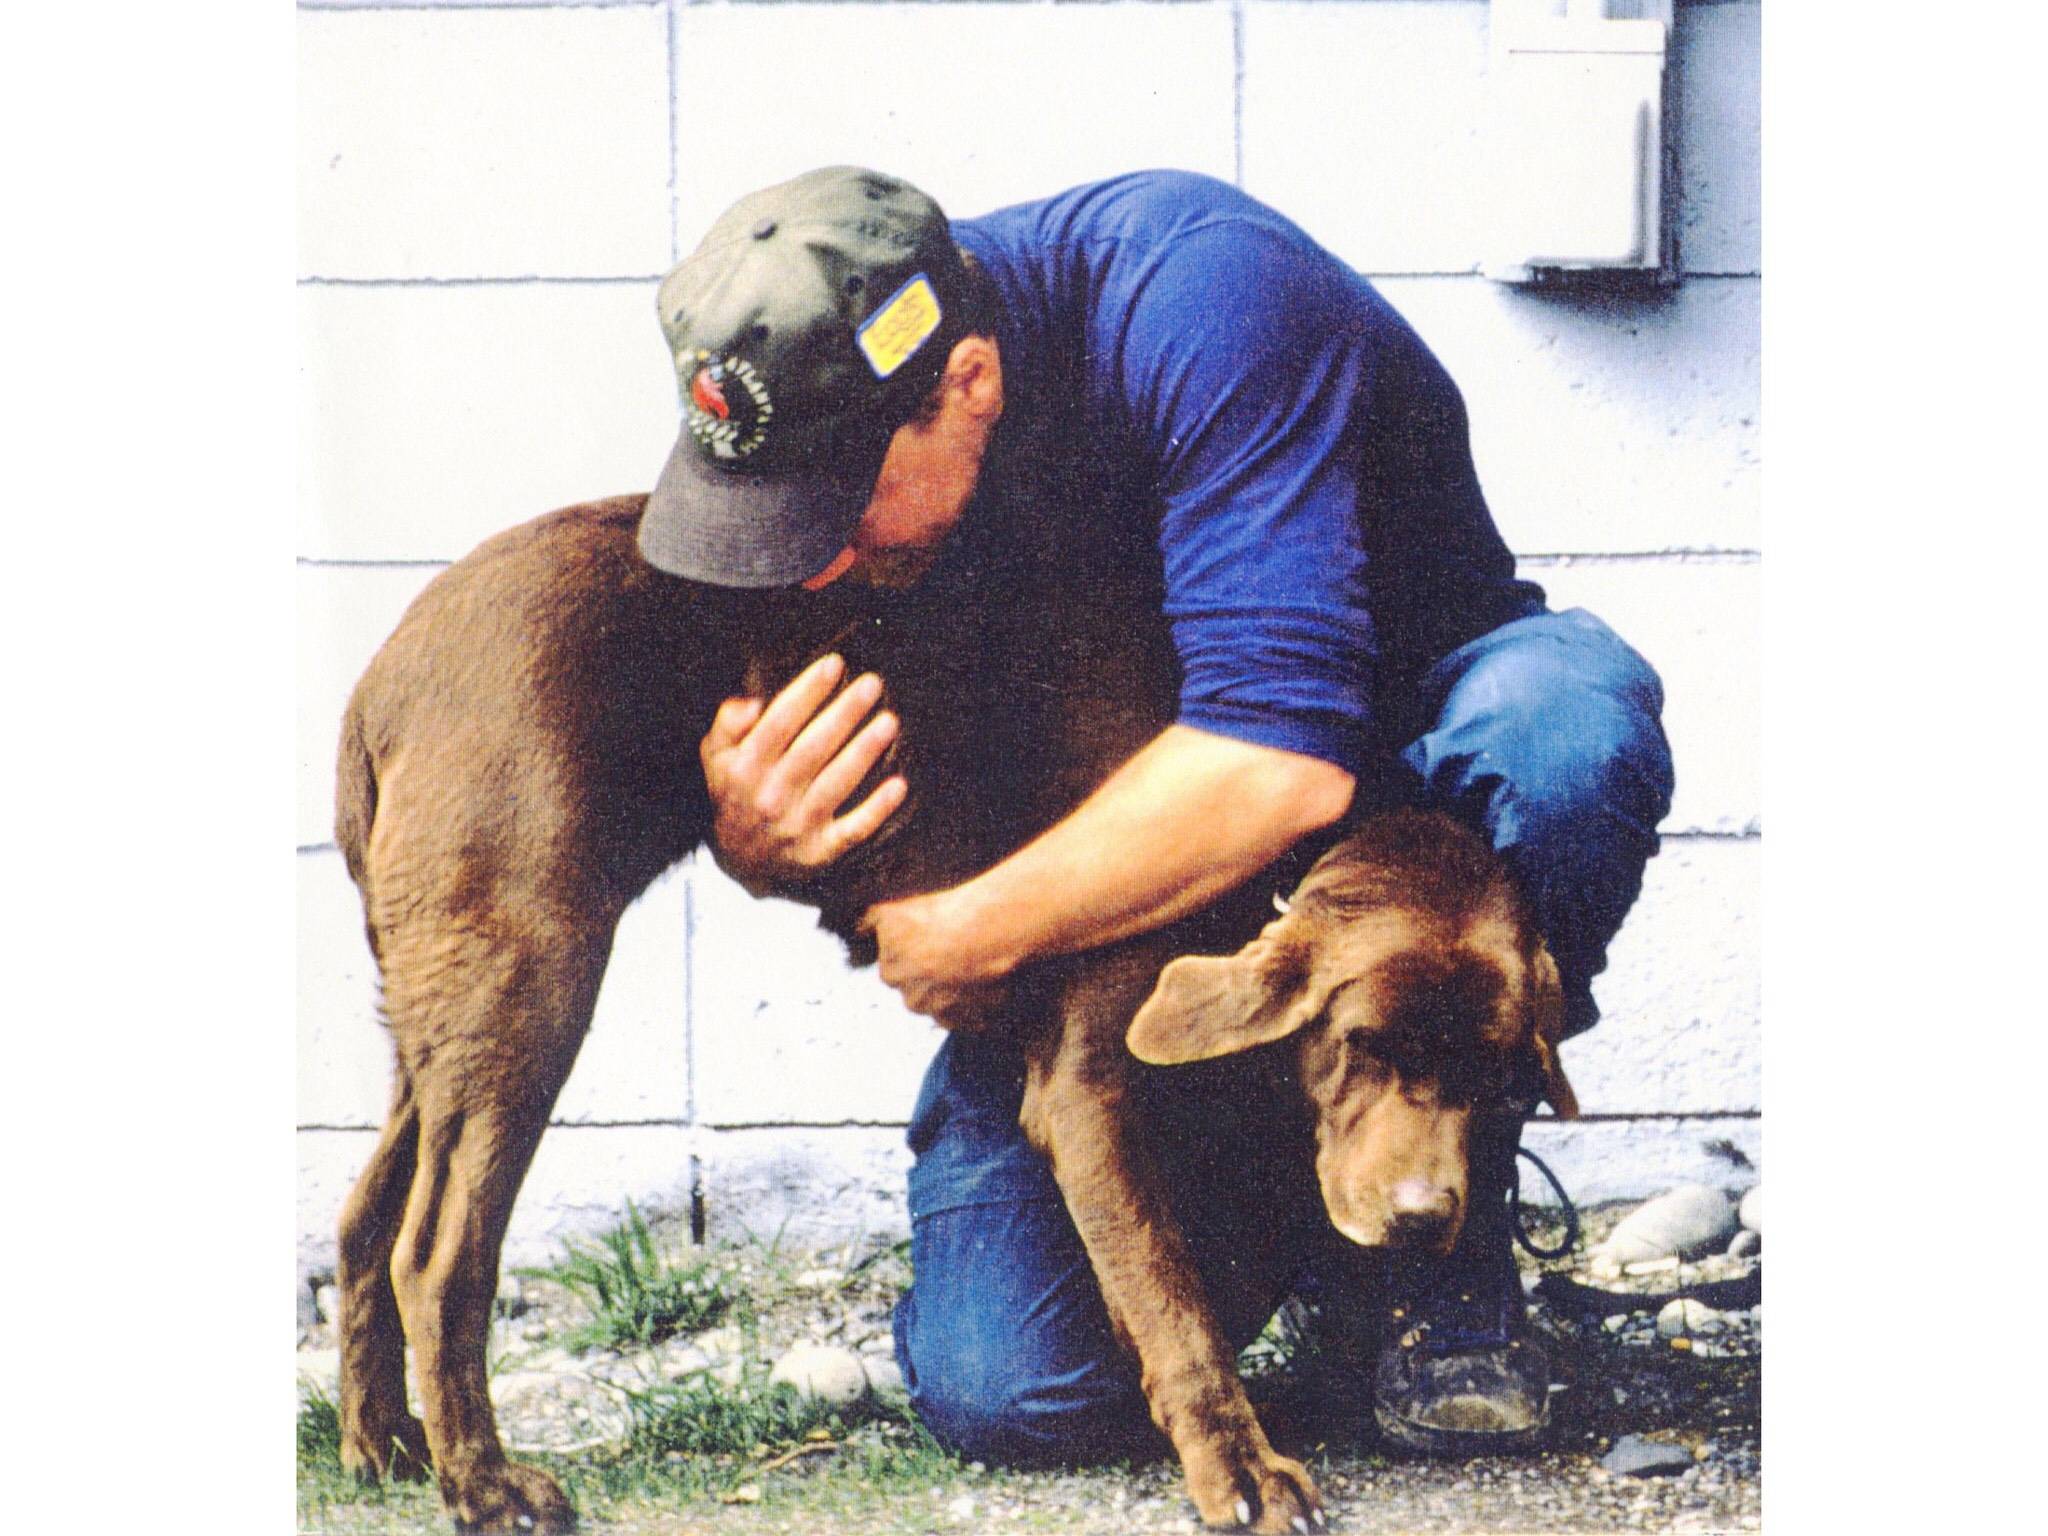 Ned Rozell and his dog Jane in 1997. (Photo courtesy of Ned Rozell)